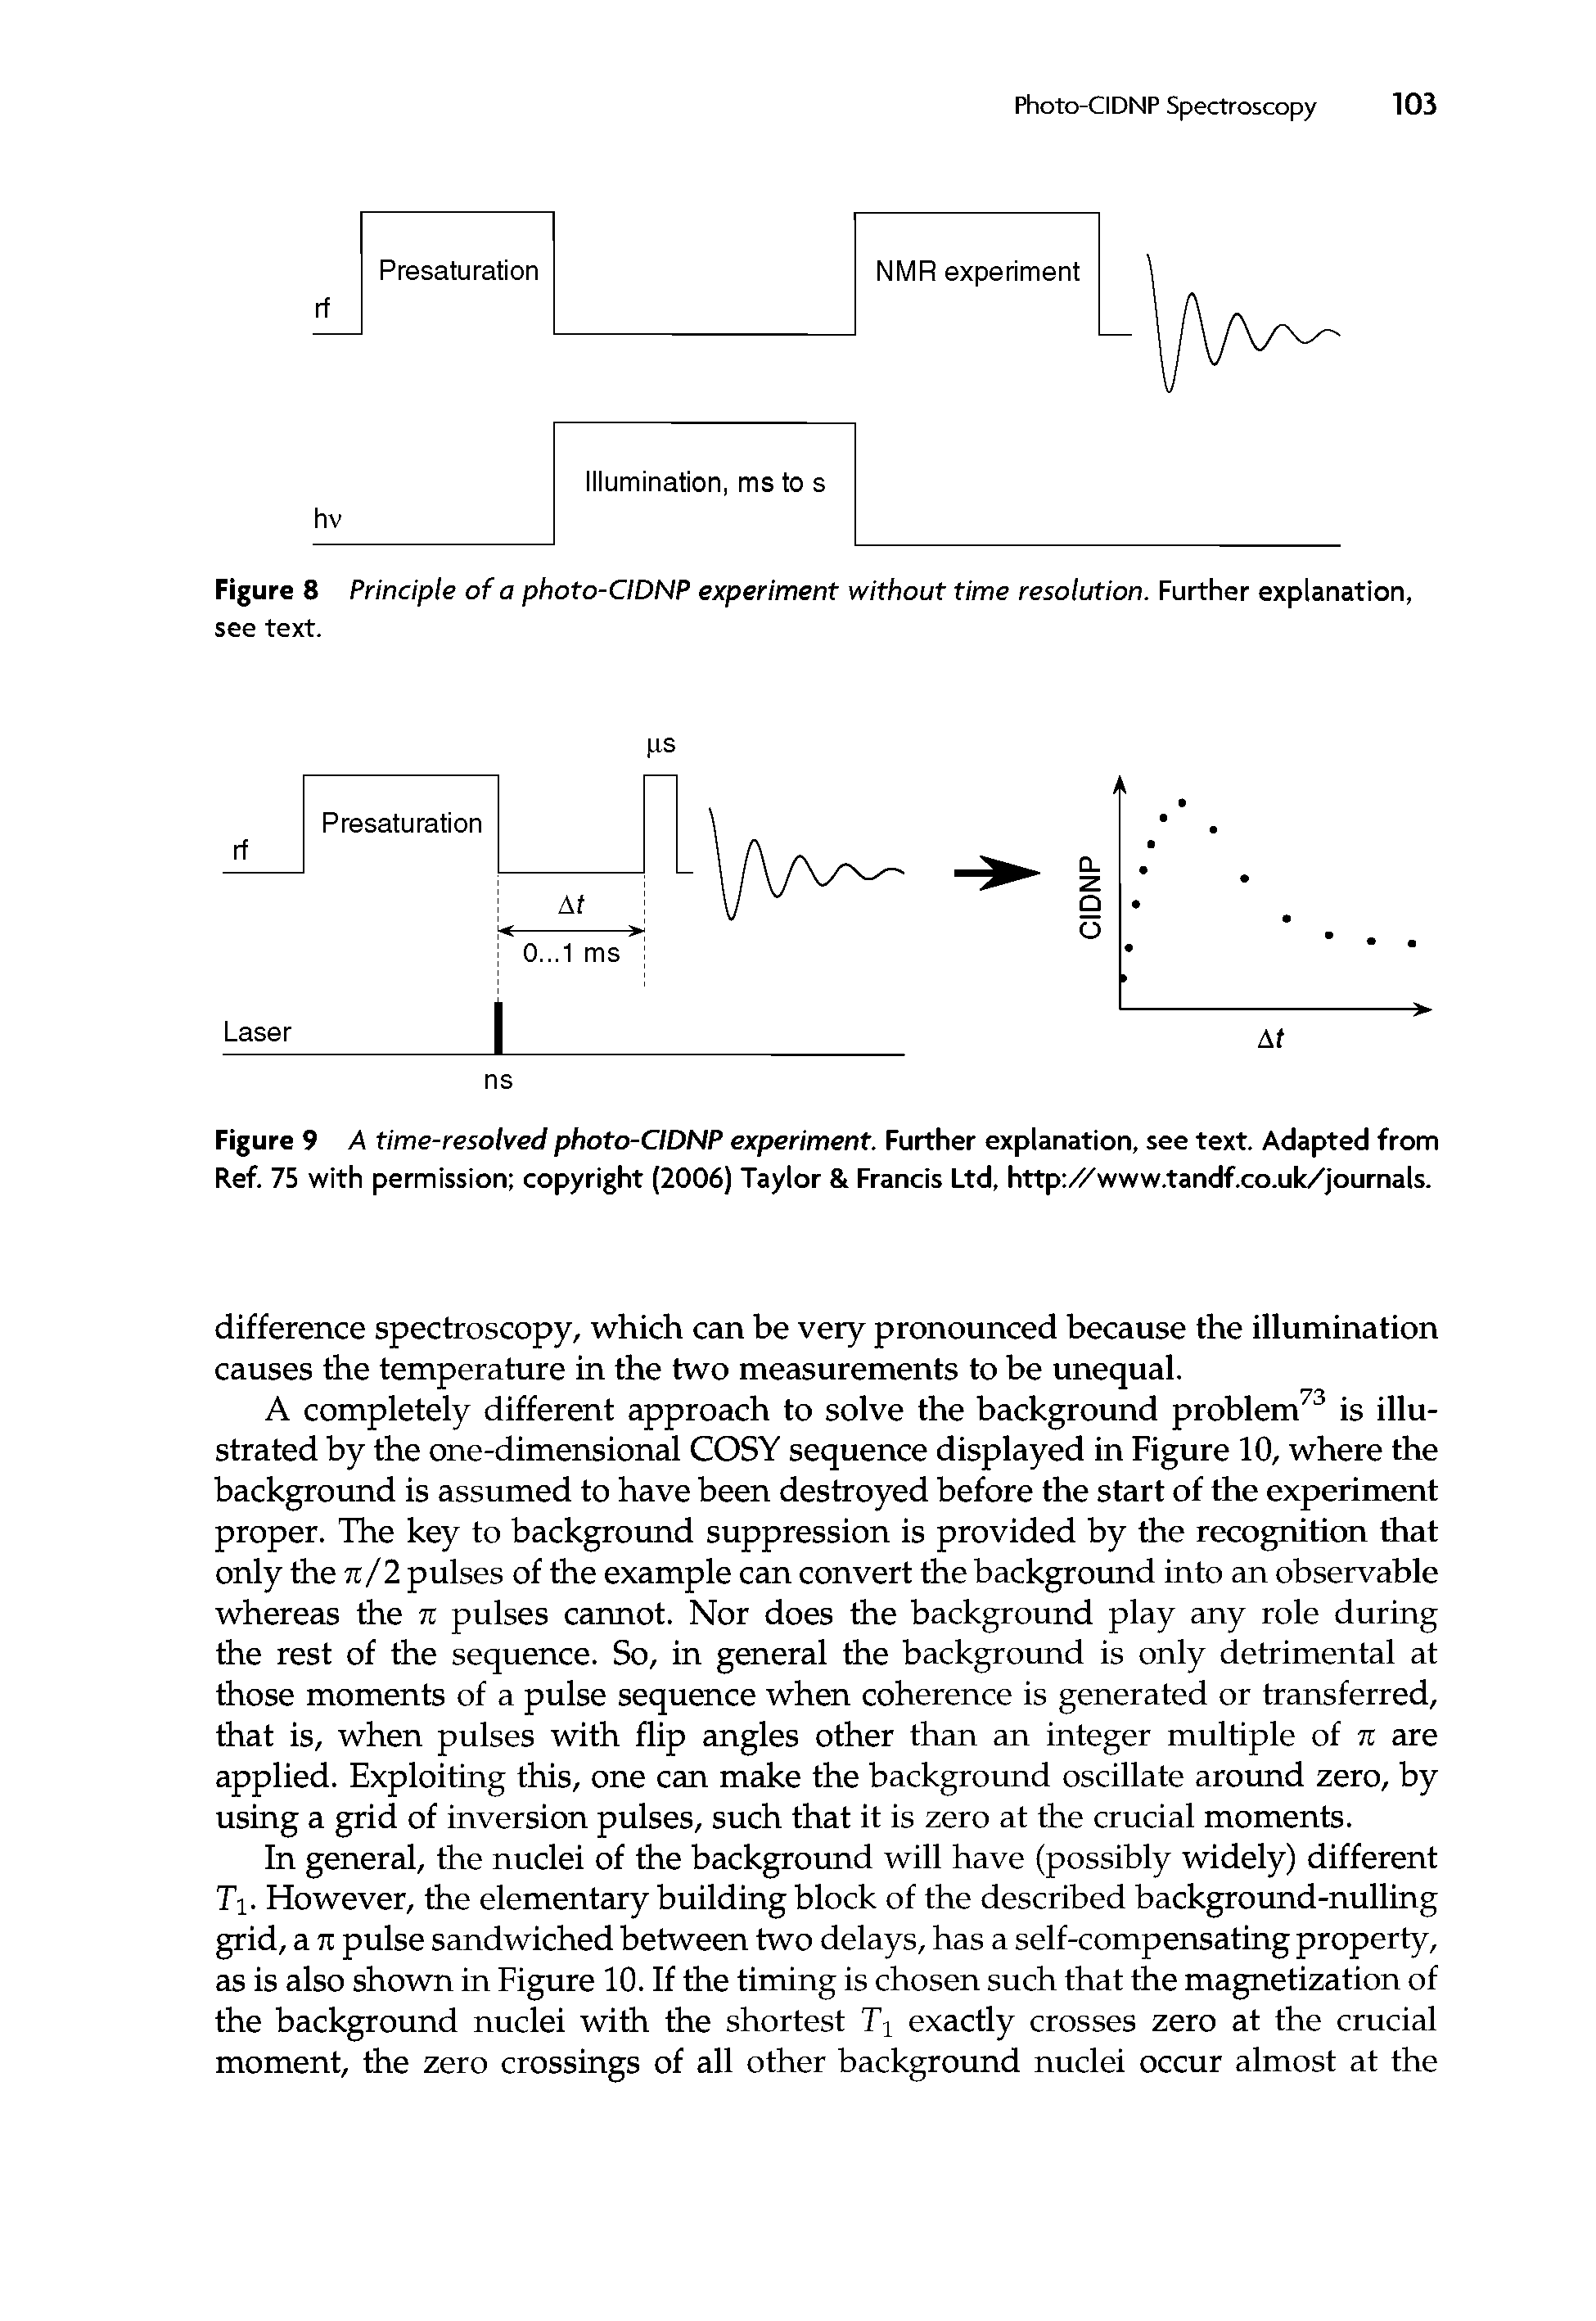 Figure 8 Principle of a photo-CIDNP experiment without time resolution. Further explanation, see text.